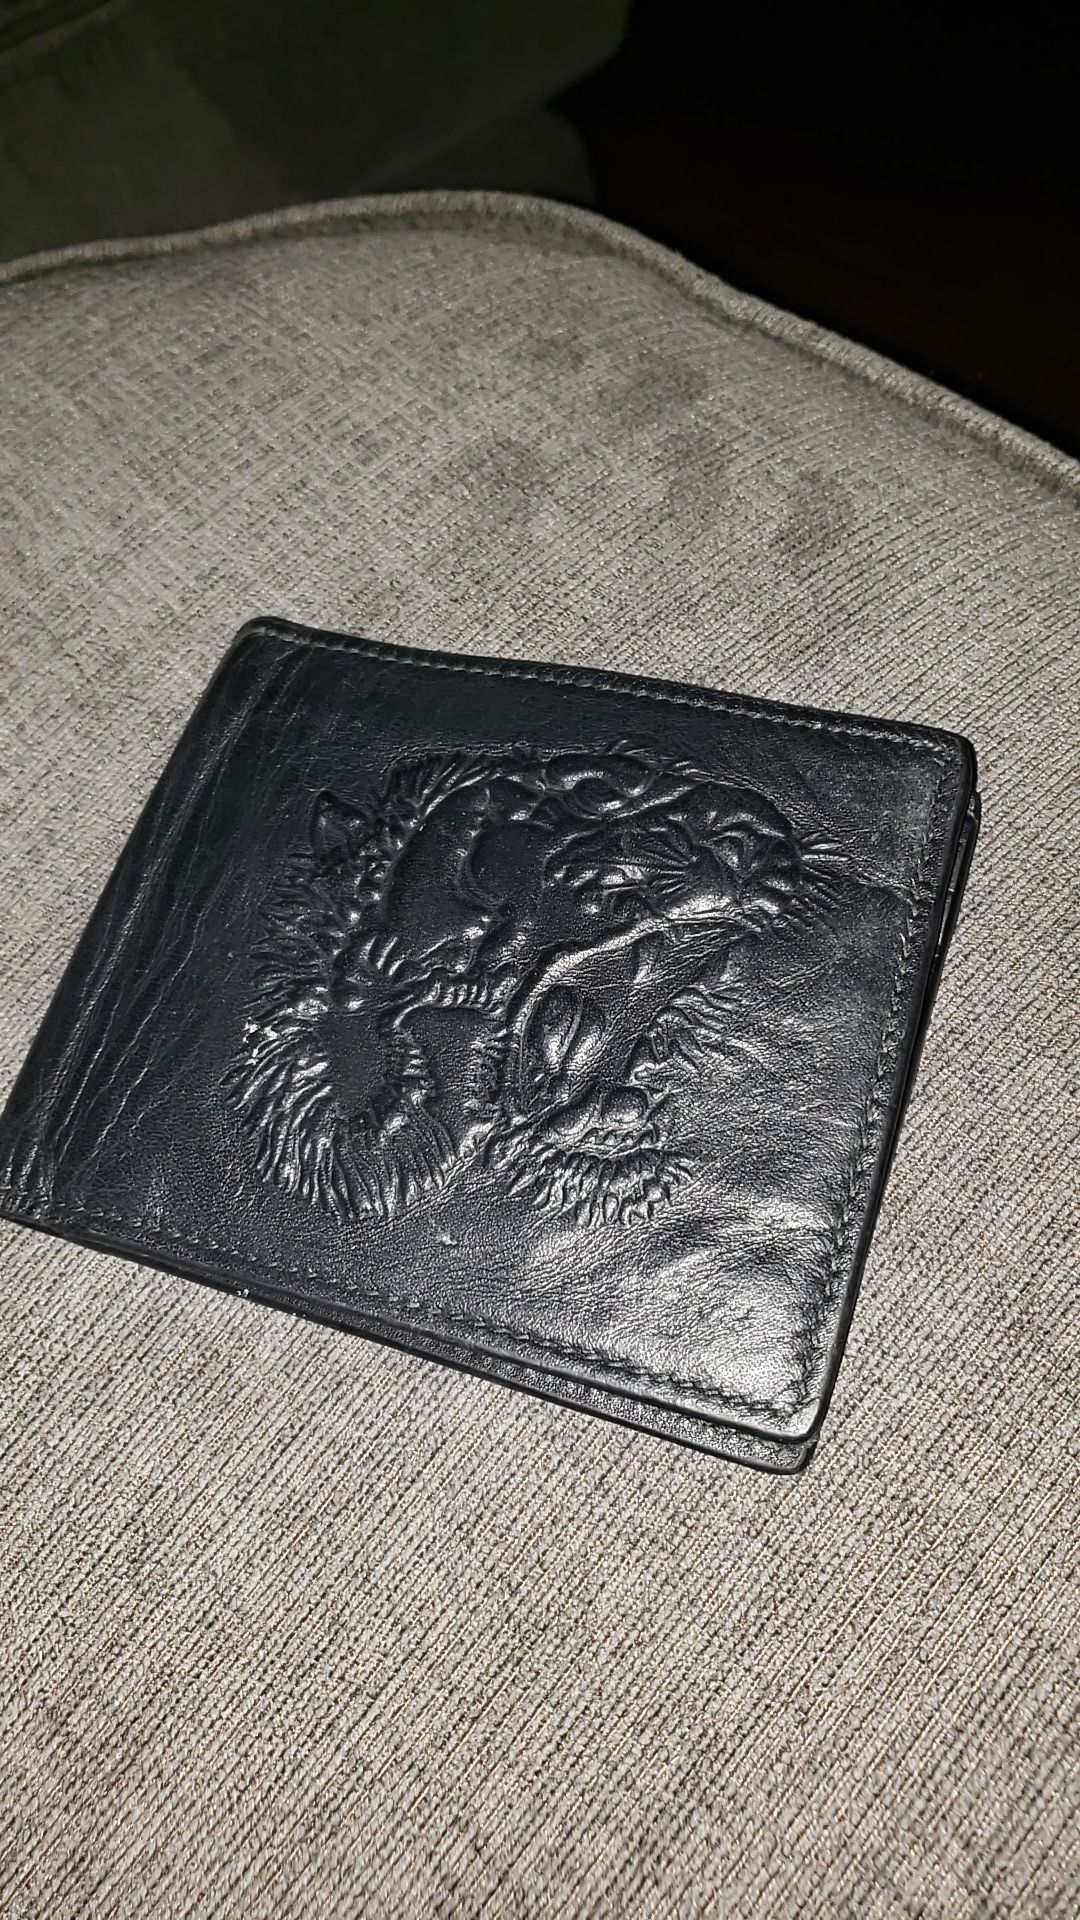 Gucci tiger embossed wallet